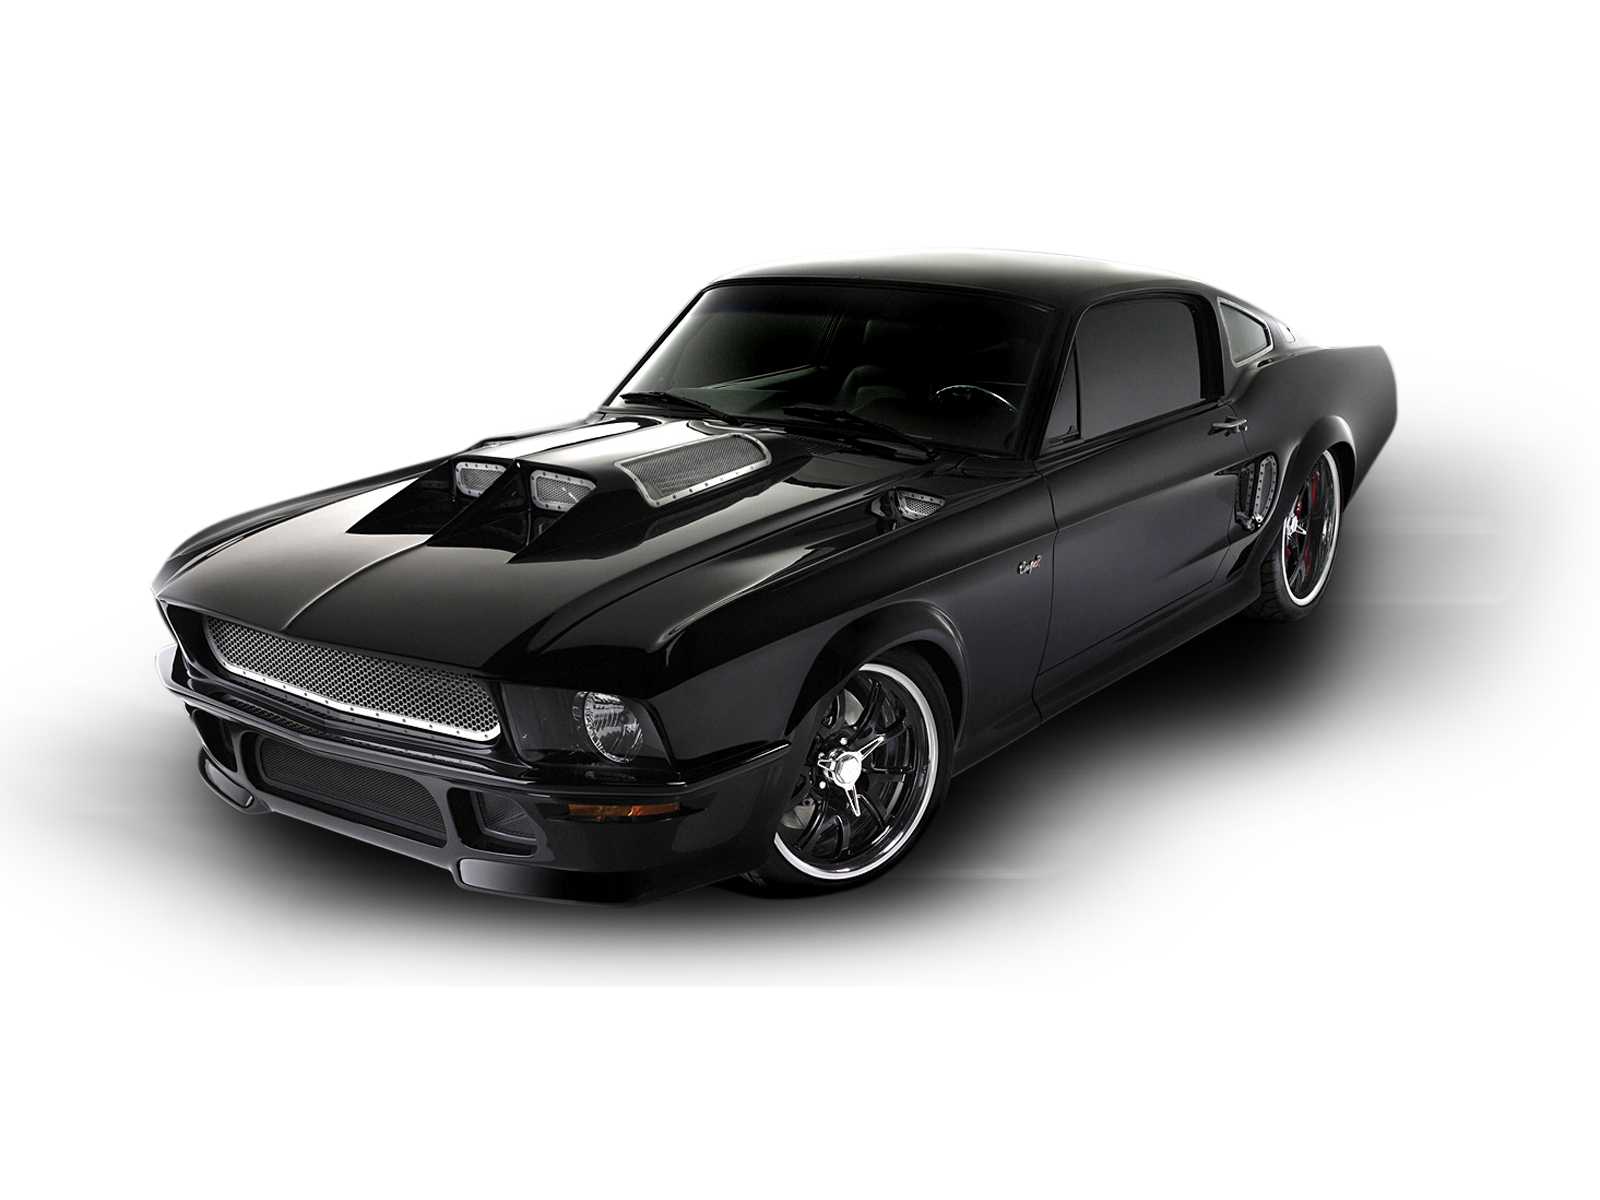 Ford Mustang image #7